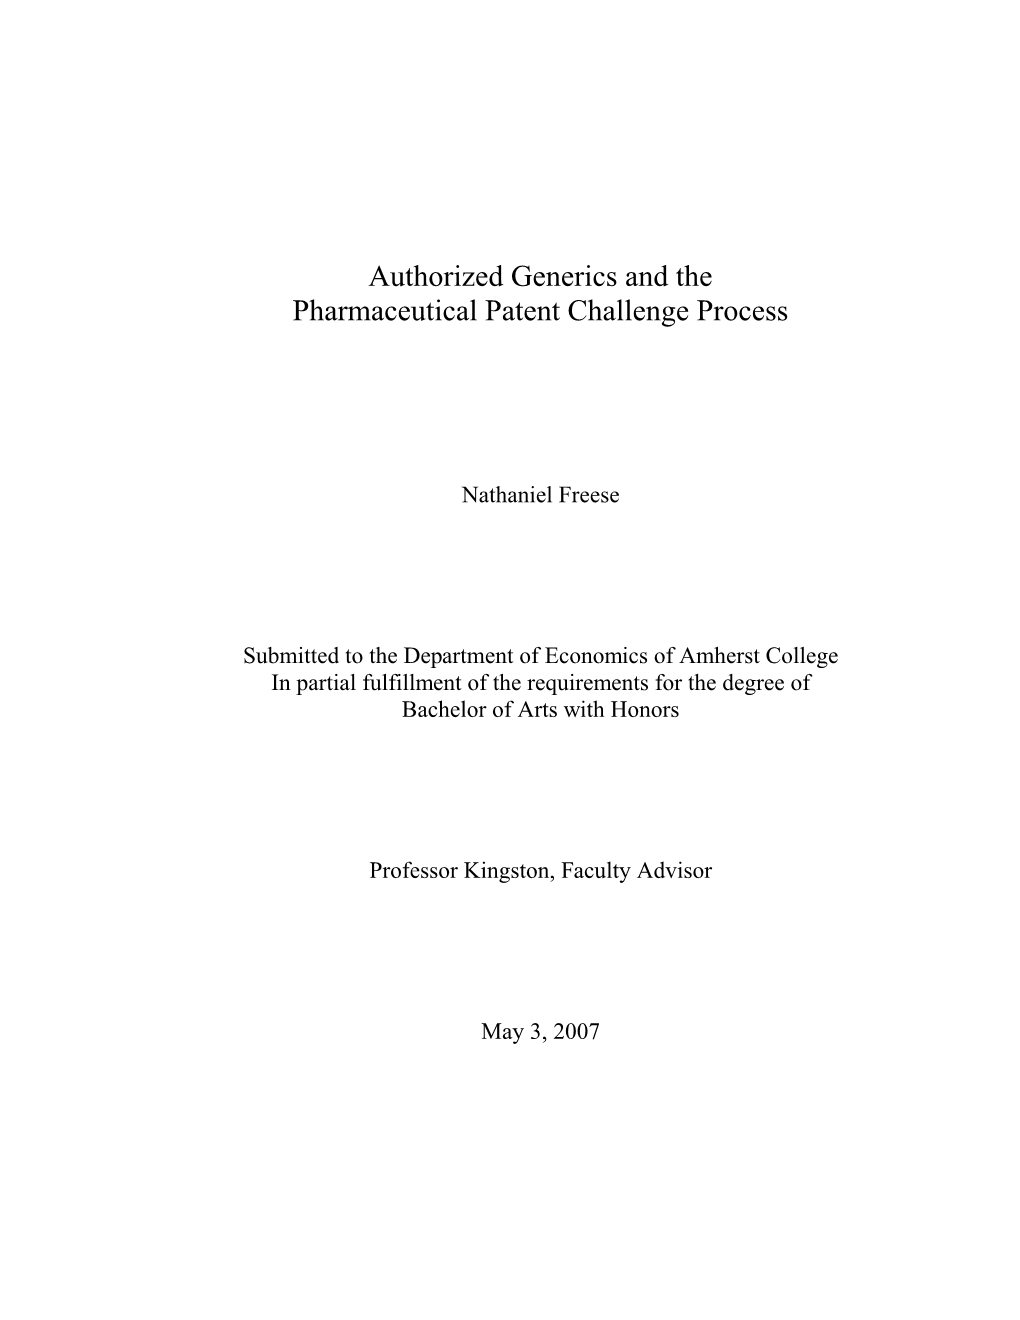 Authorized Generics and the Pharmaceutical Patent Challenge Process